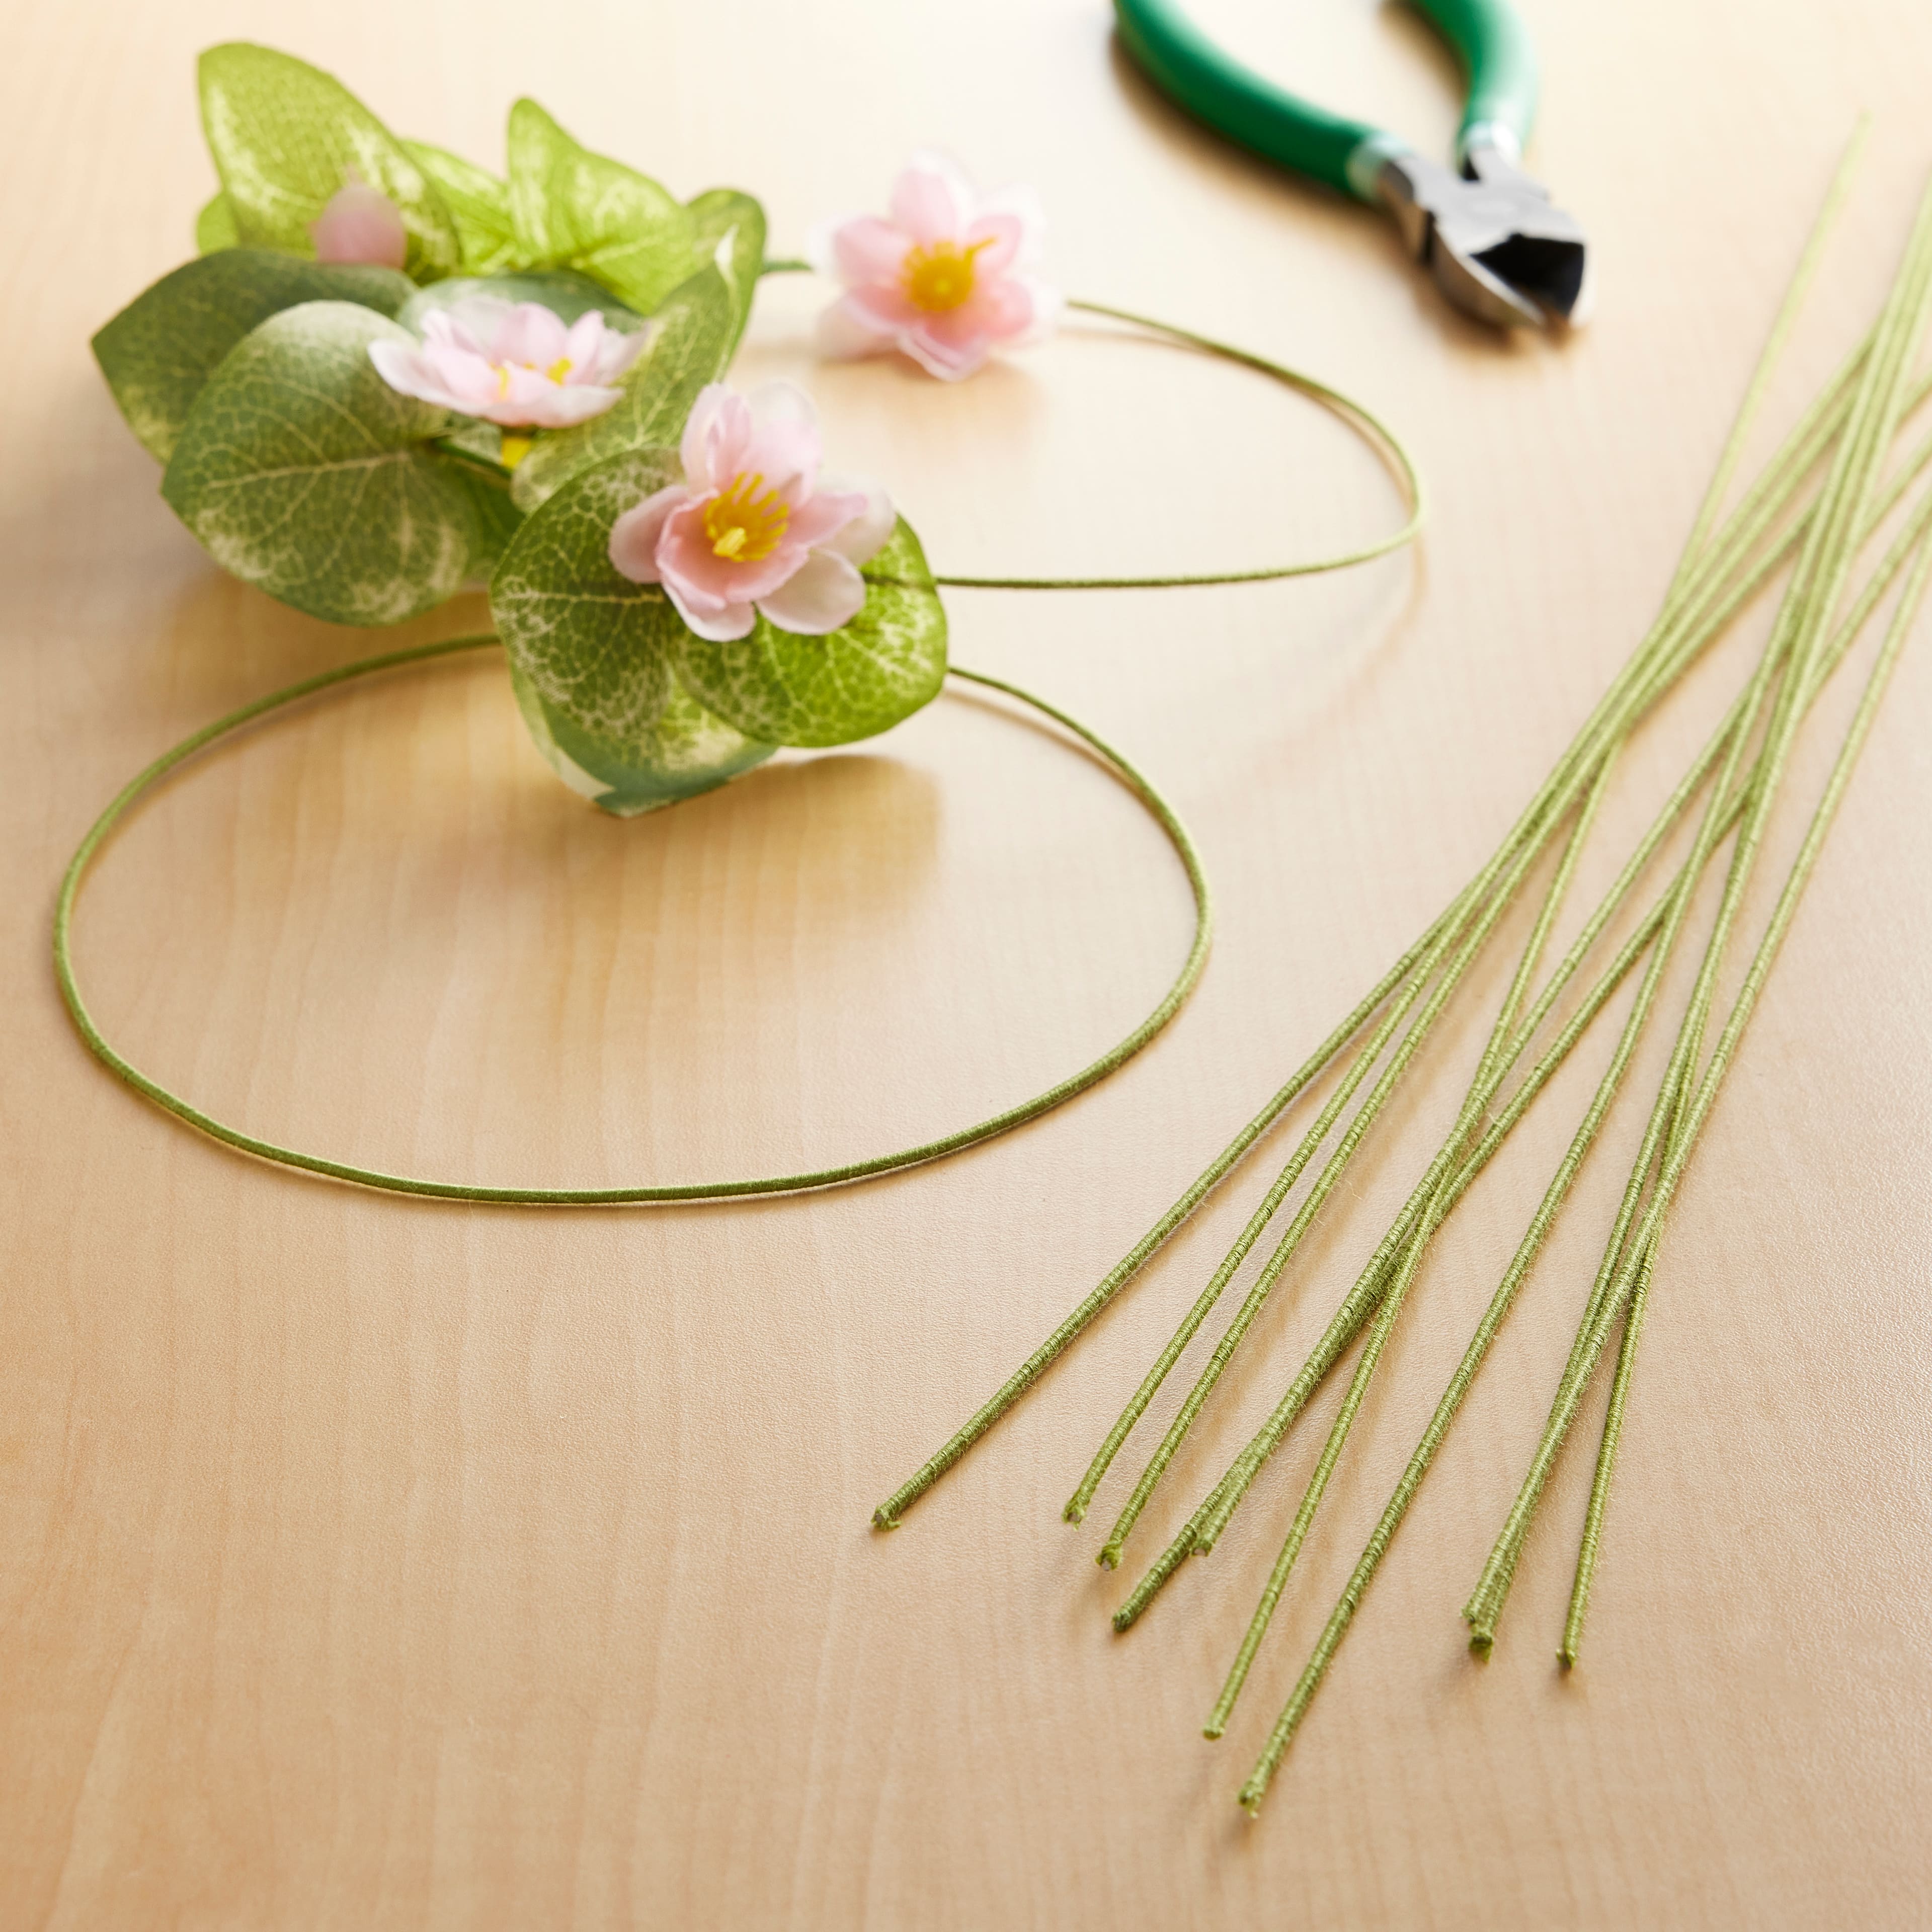 32 Gauge Floral Stem Wire - Cloth Covered - Green